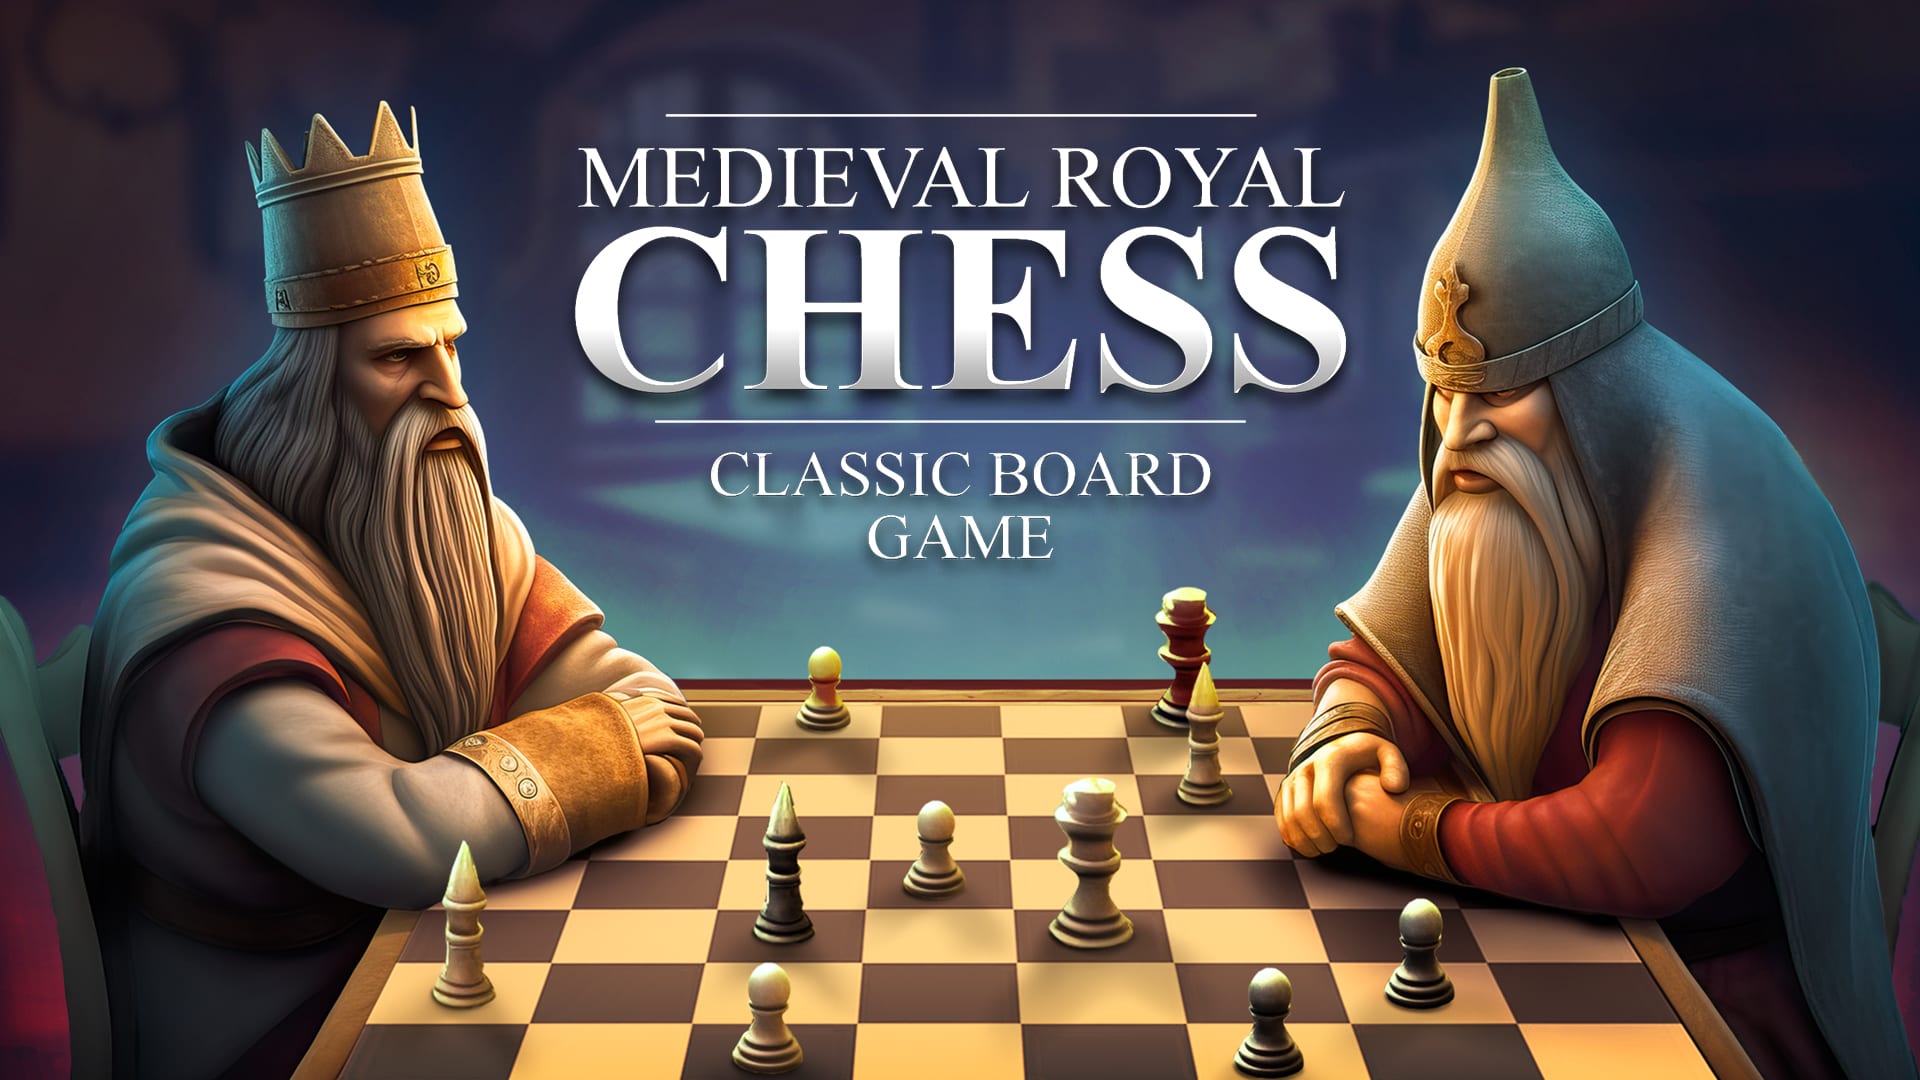 Medieval Royal Chess: Classic Board Game 1